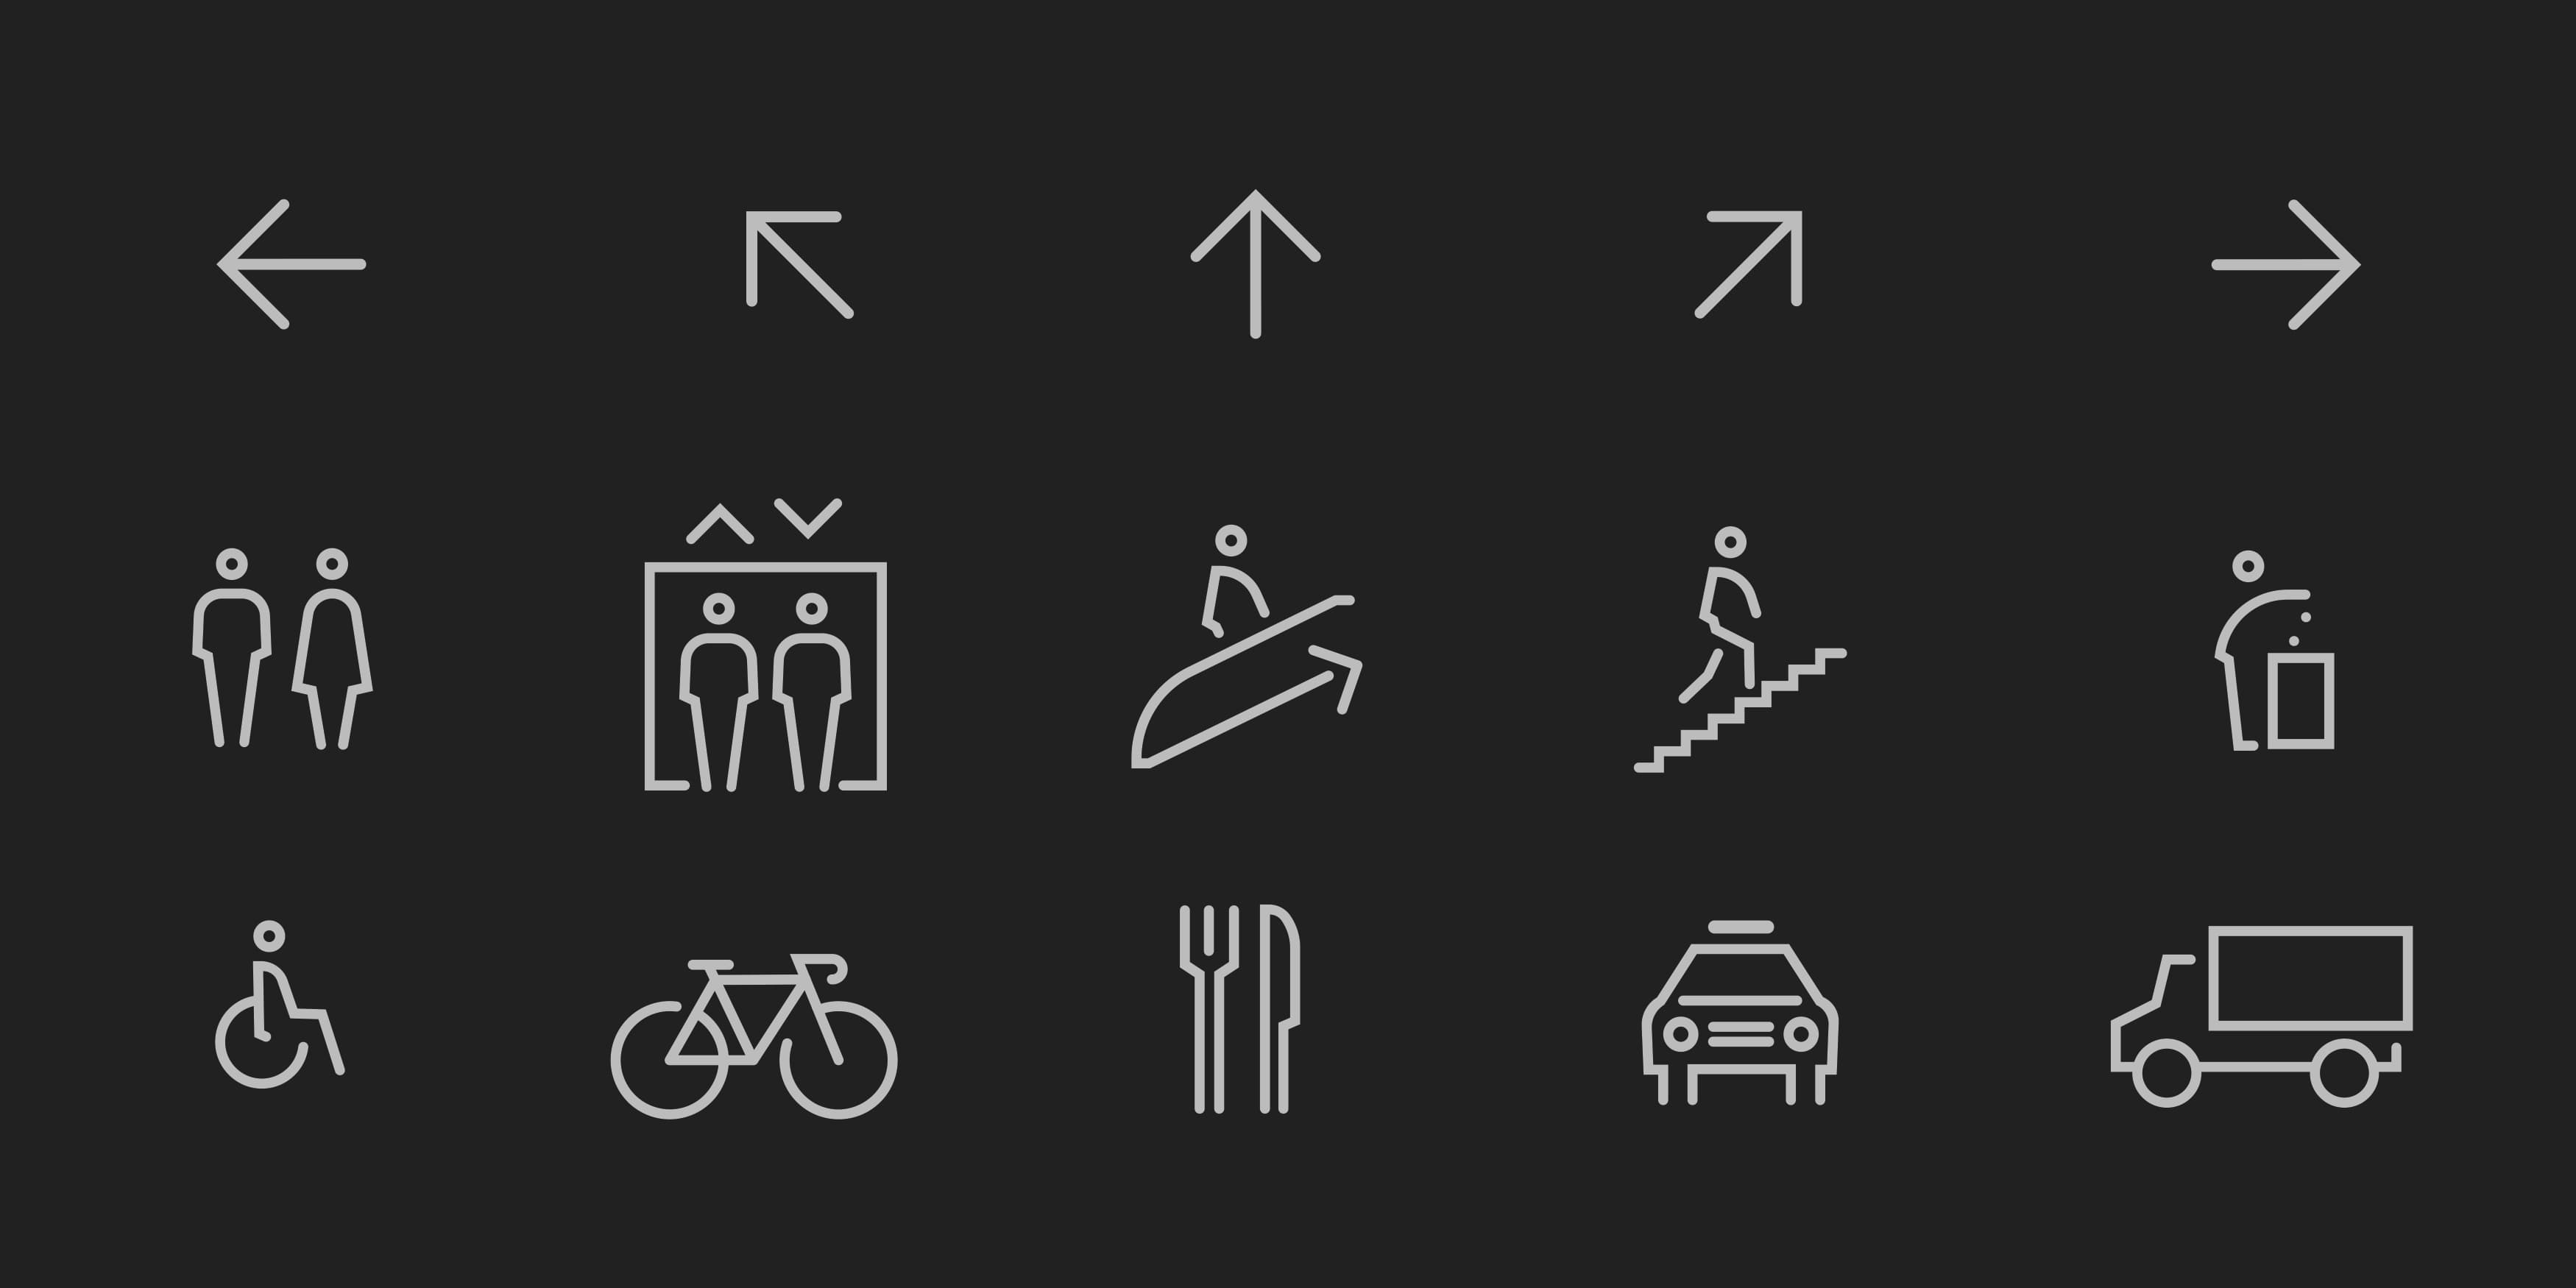 Iconography for parking and wayfinding signage, designed by RSM Design. 